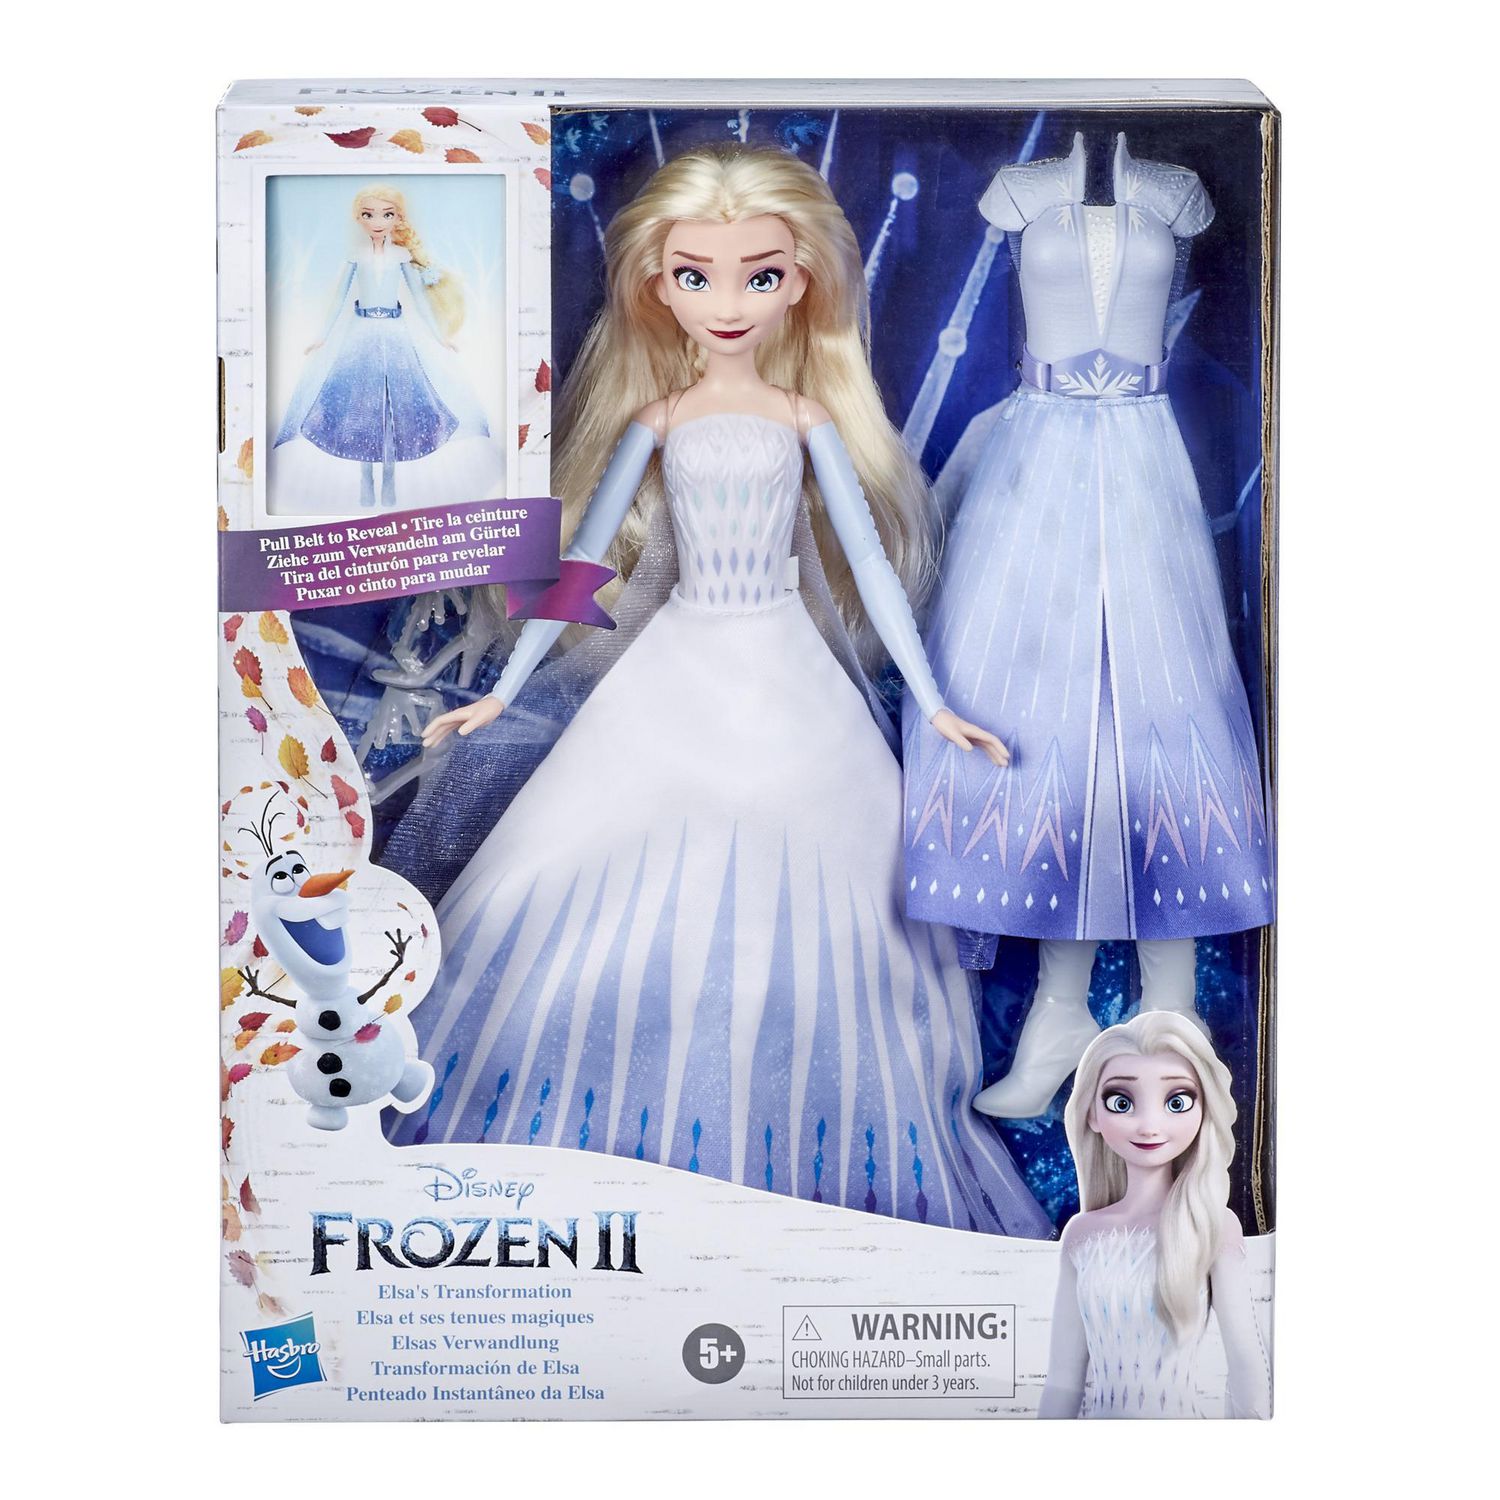 Disney's Frozen 2 Elsa's Transformation Fashion Doll With 2 Outfits and 2  Hair Styles, Toy Inspired by Disney's Frozen 2 | Walmart Canada